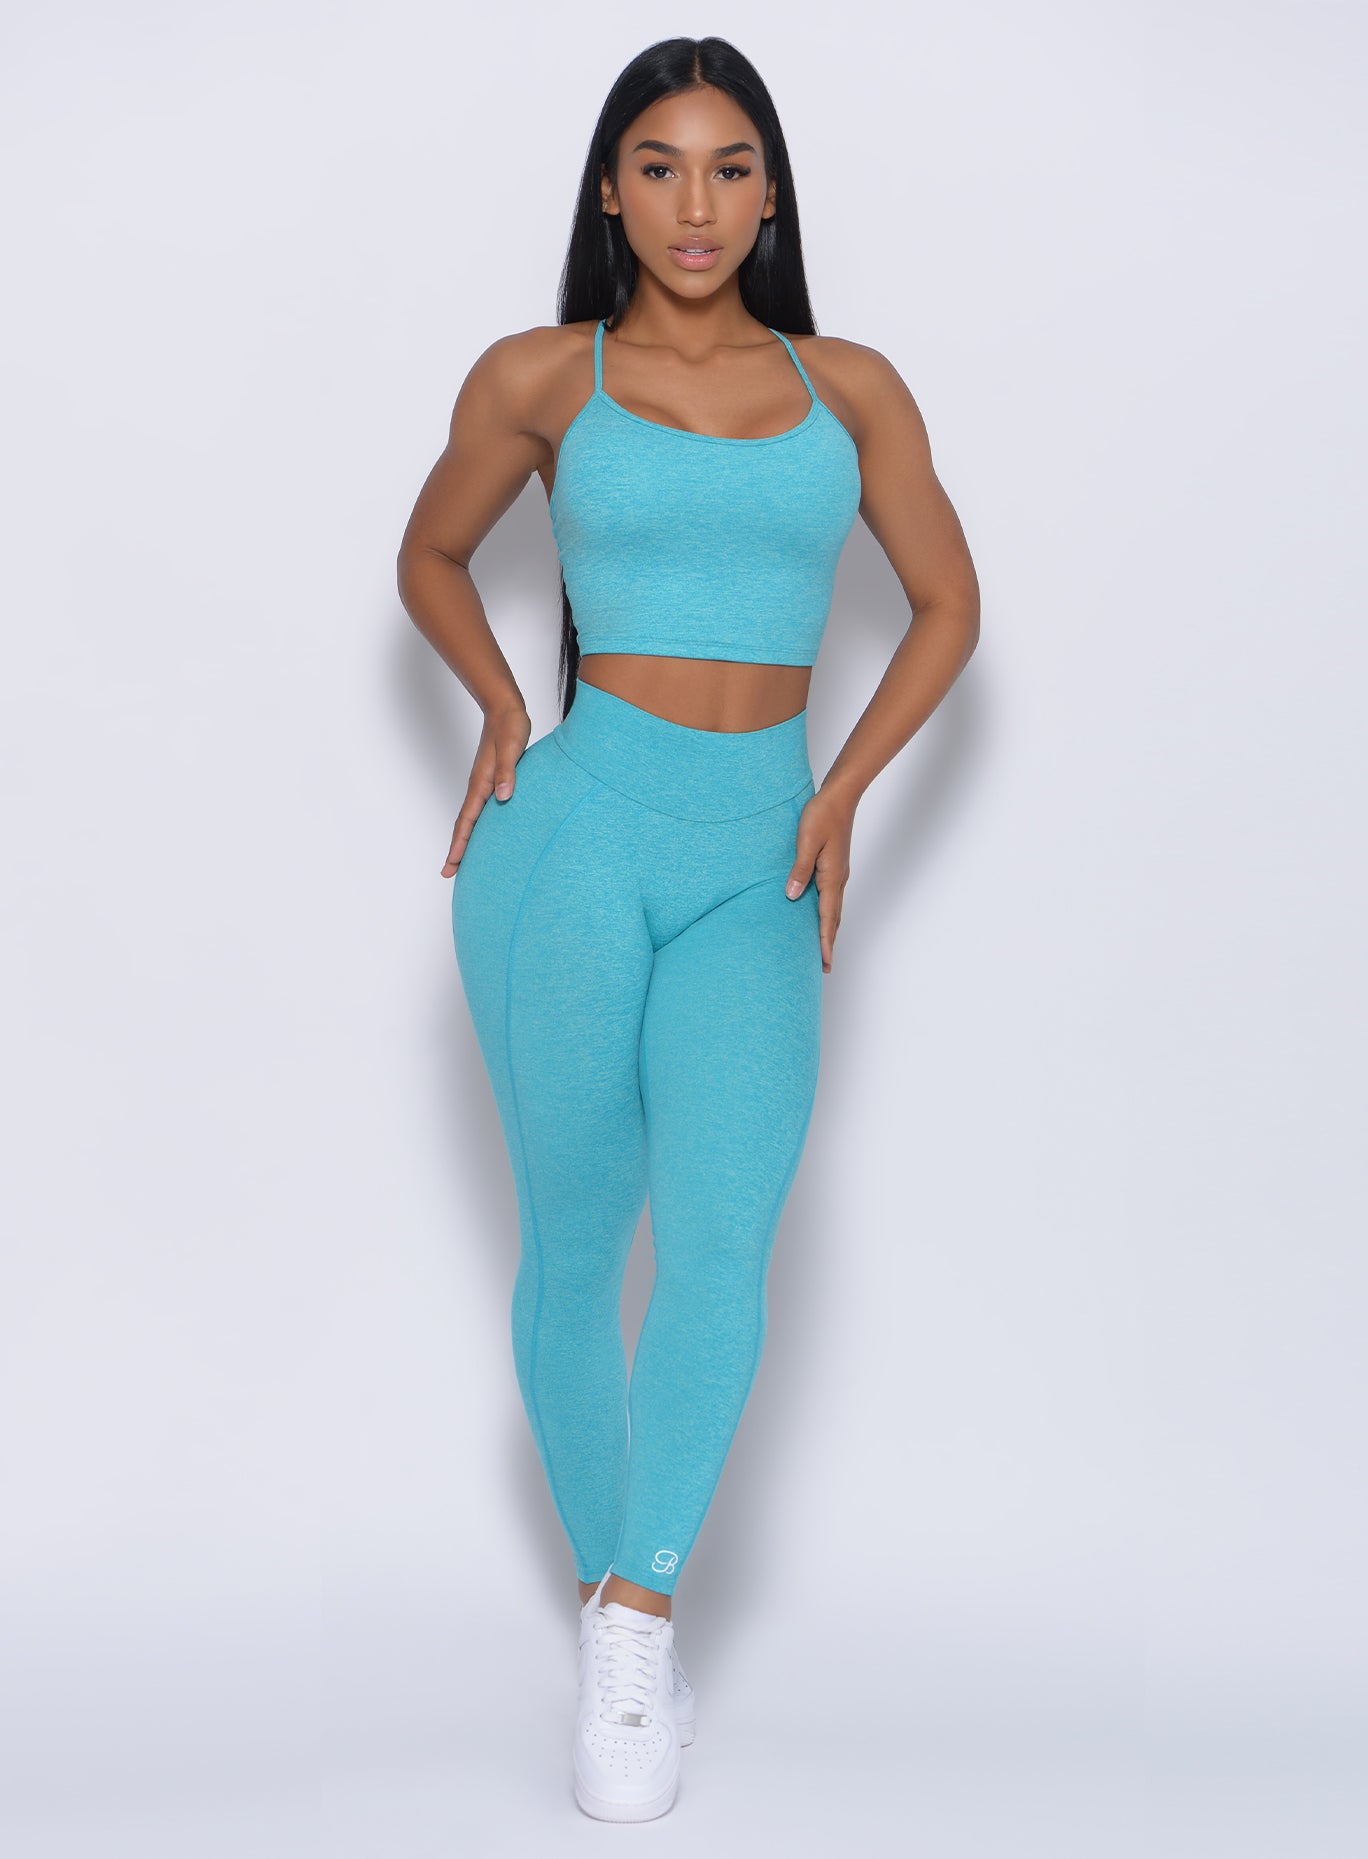 Front profile view of a model with her hands on waist wearing our relax sports bra in crystal blue color and a matching leggings